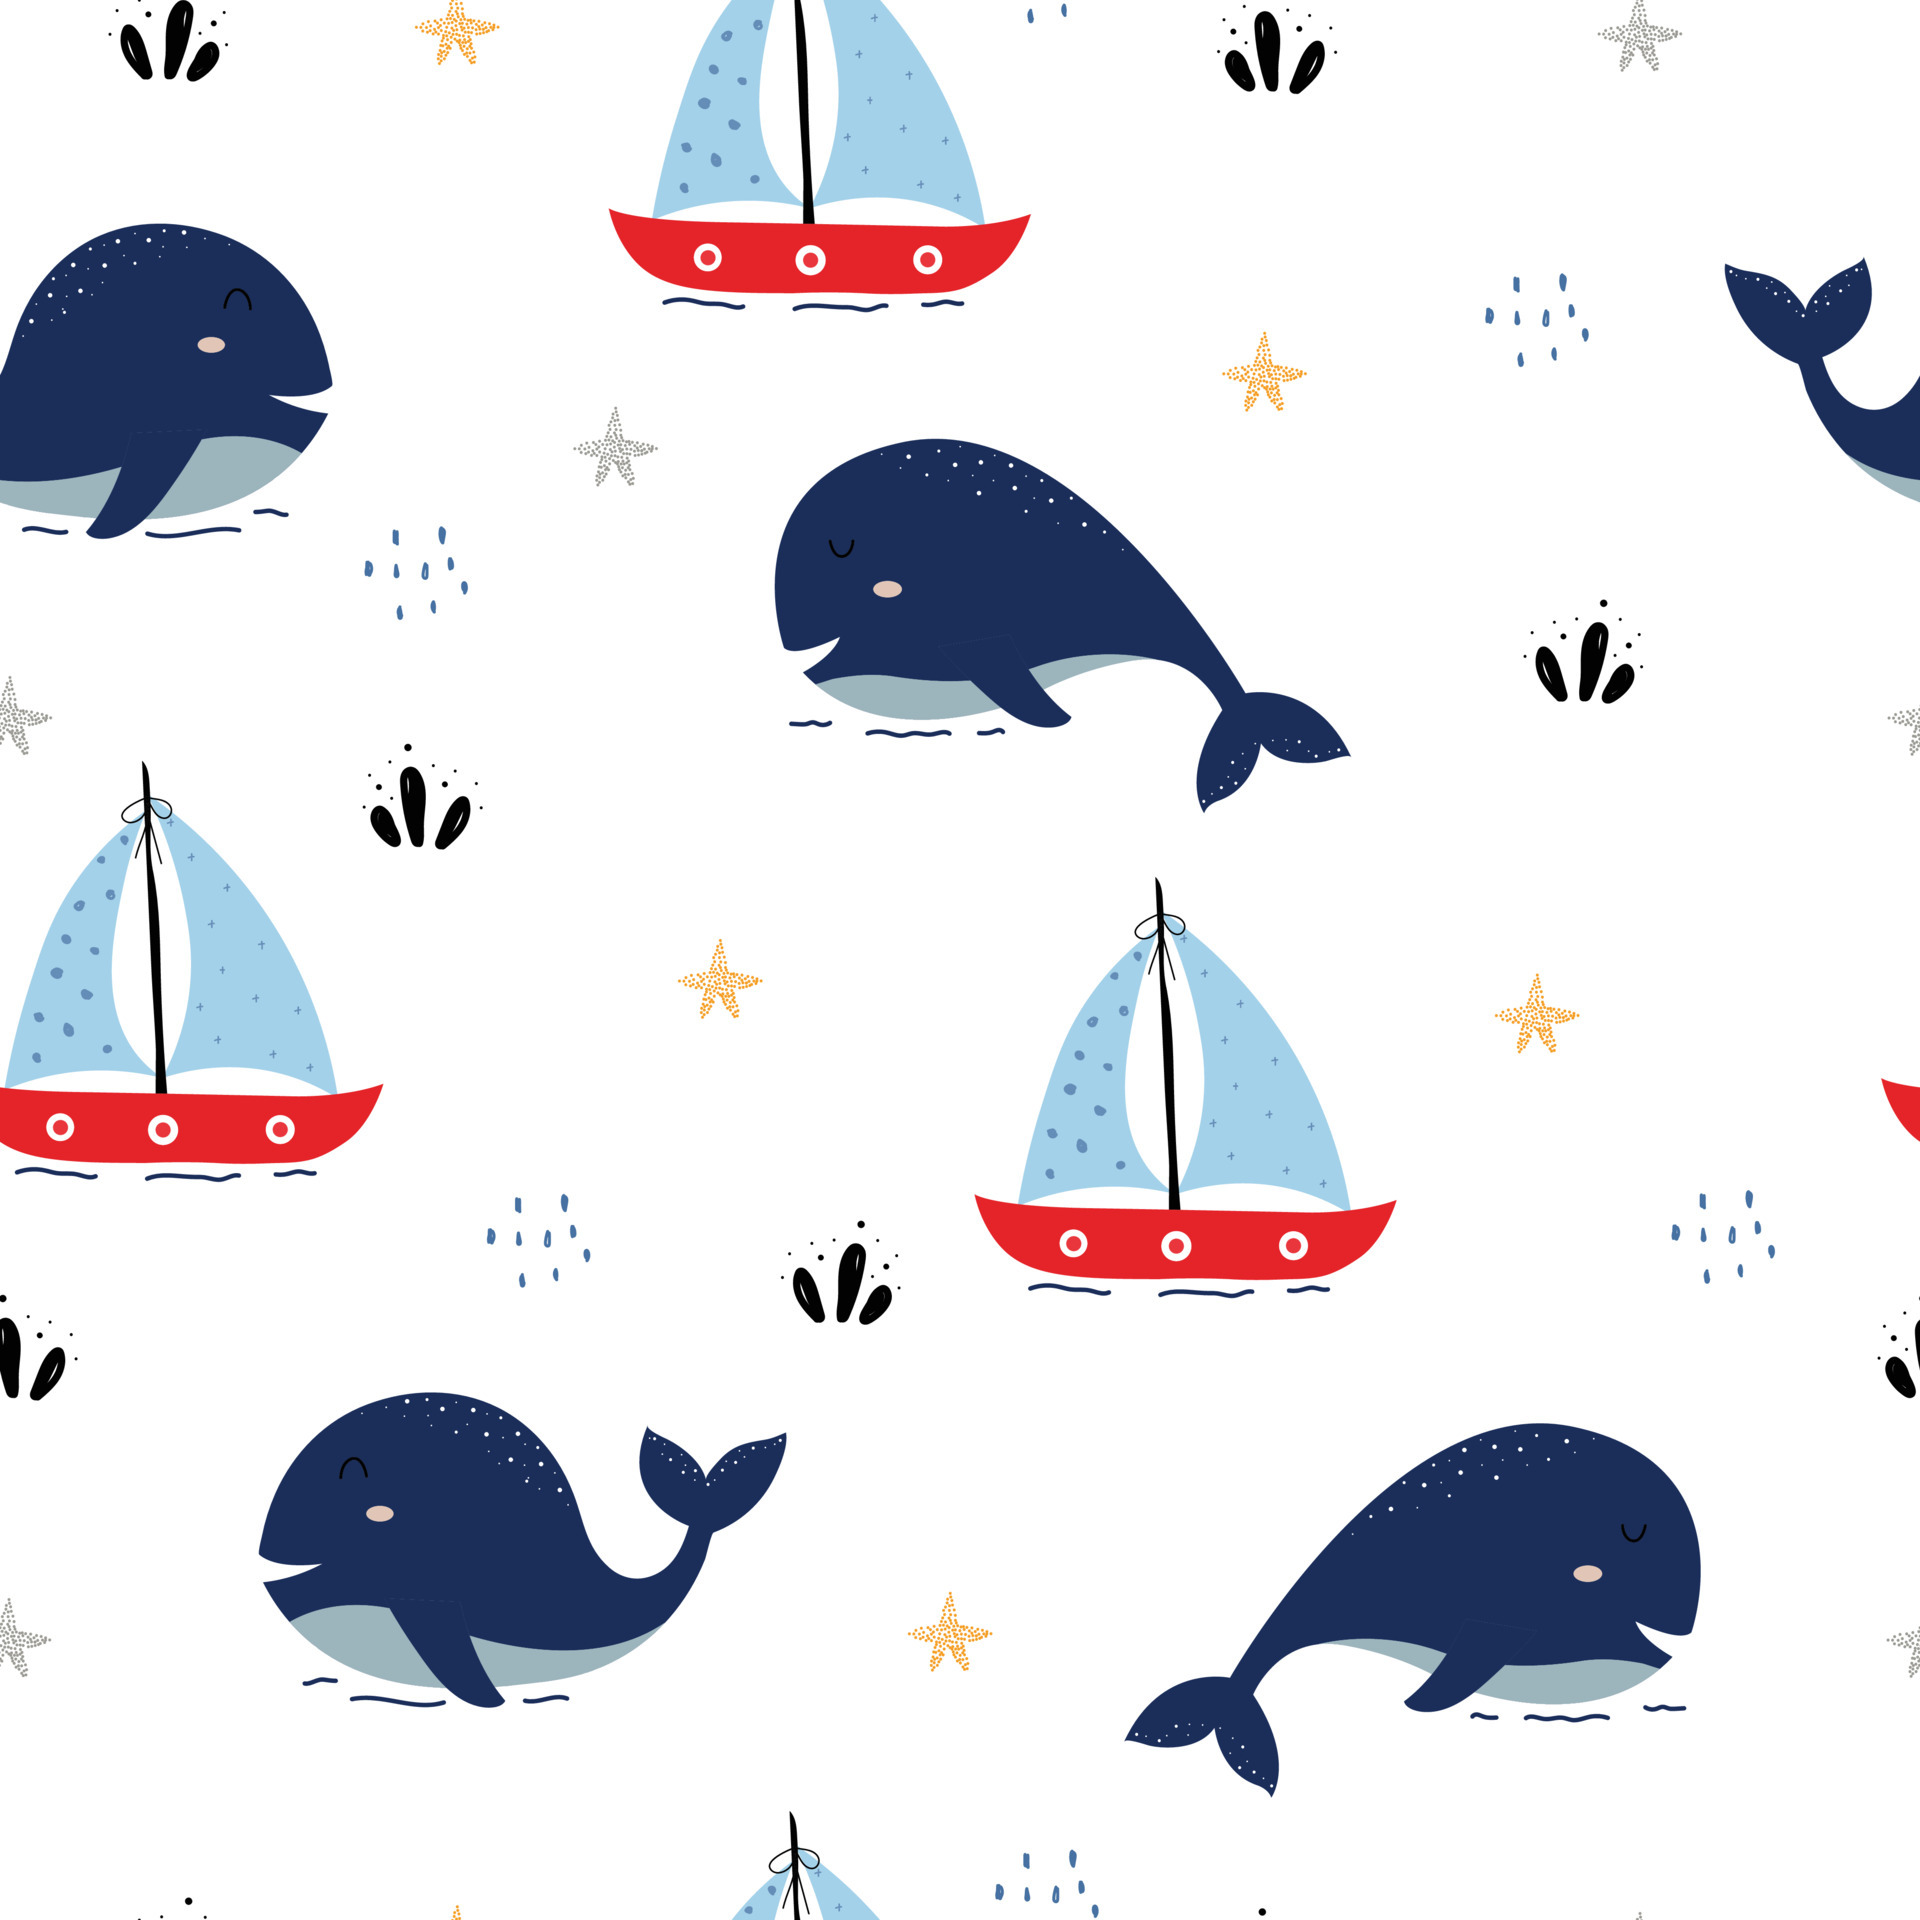 Seamless pattern The sea background with whale and boats Cute design, hand drawn in cartoon style. Used for publication, wallpaper, textiles, vector illustration